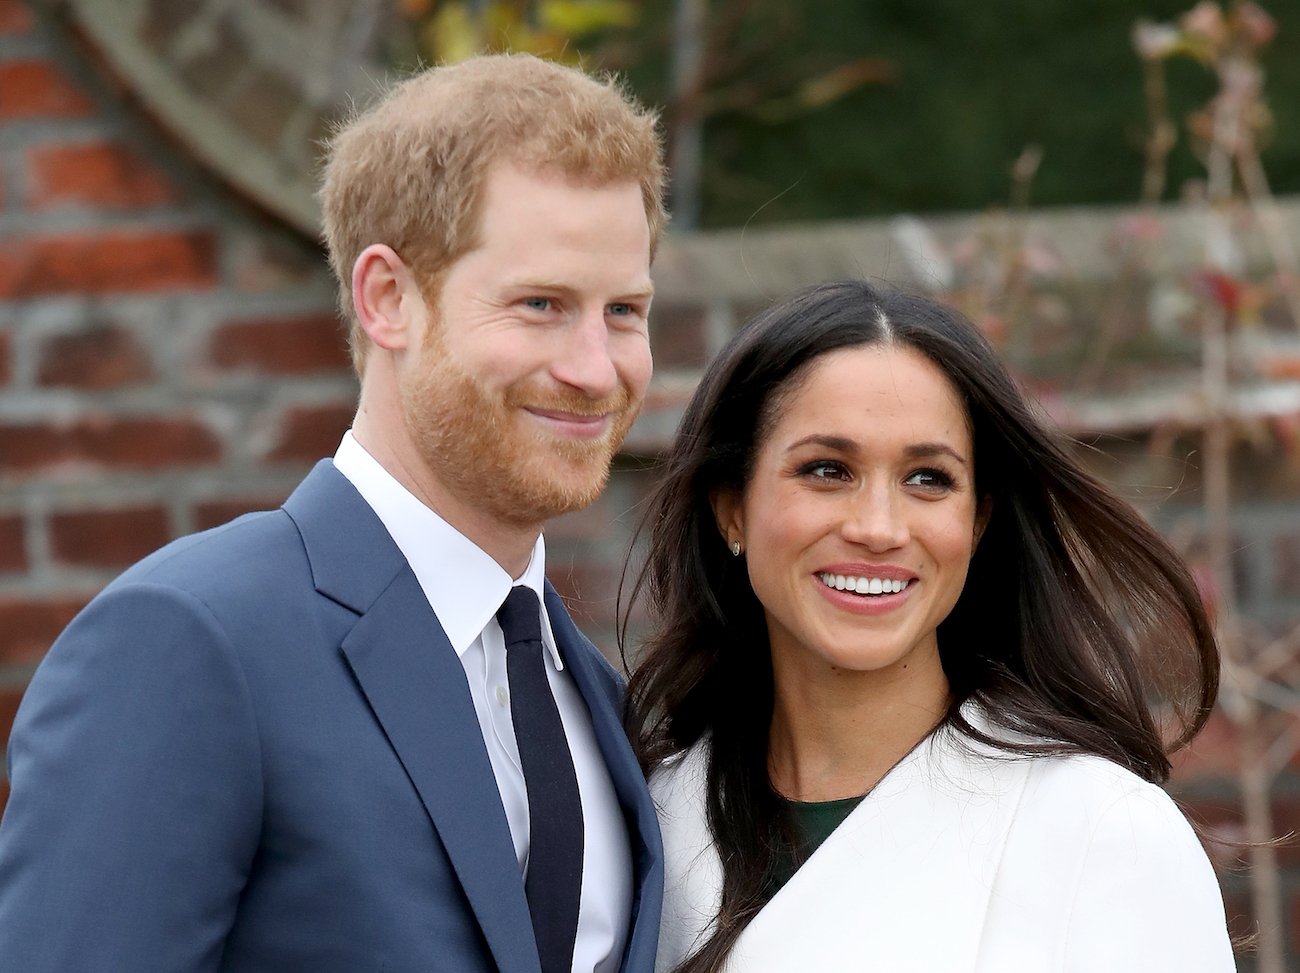 Prince Harry and Meghan Markle looking off-camera and smiling